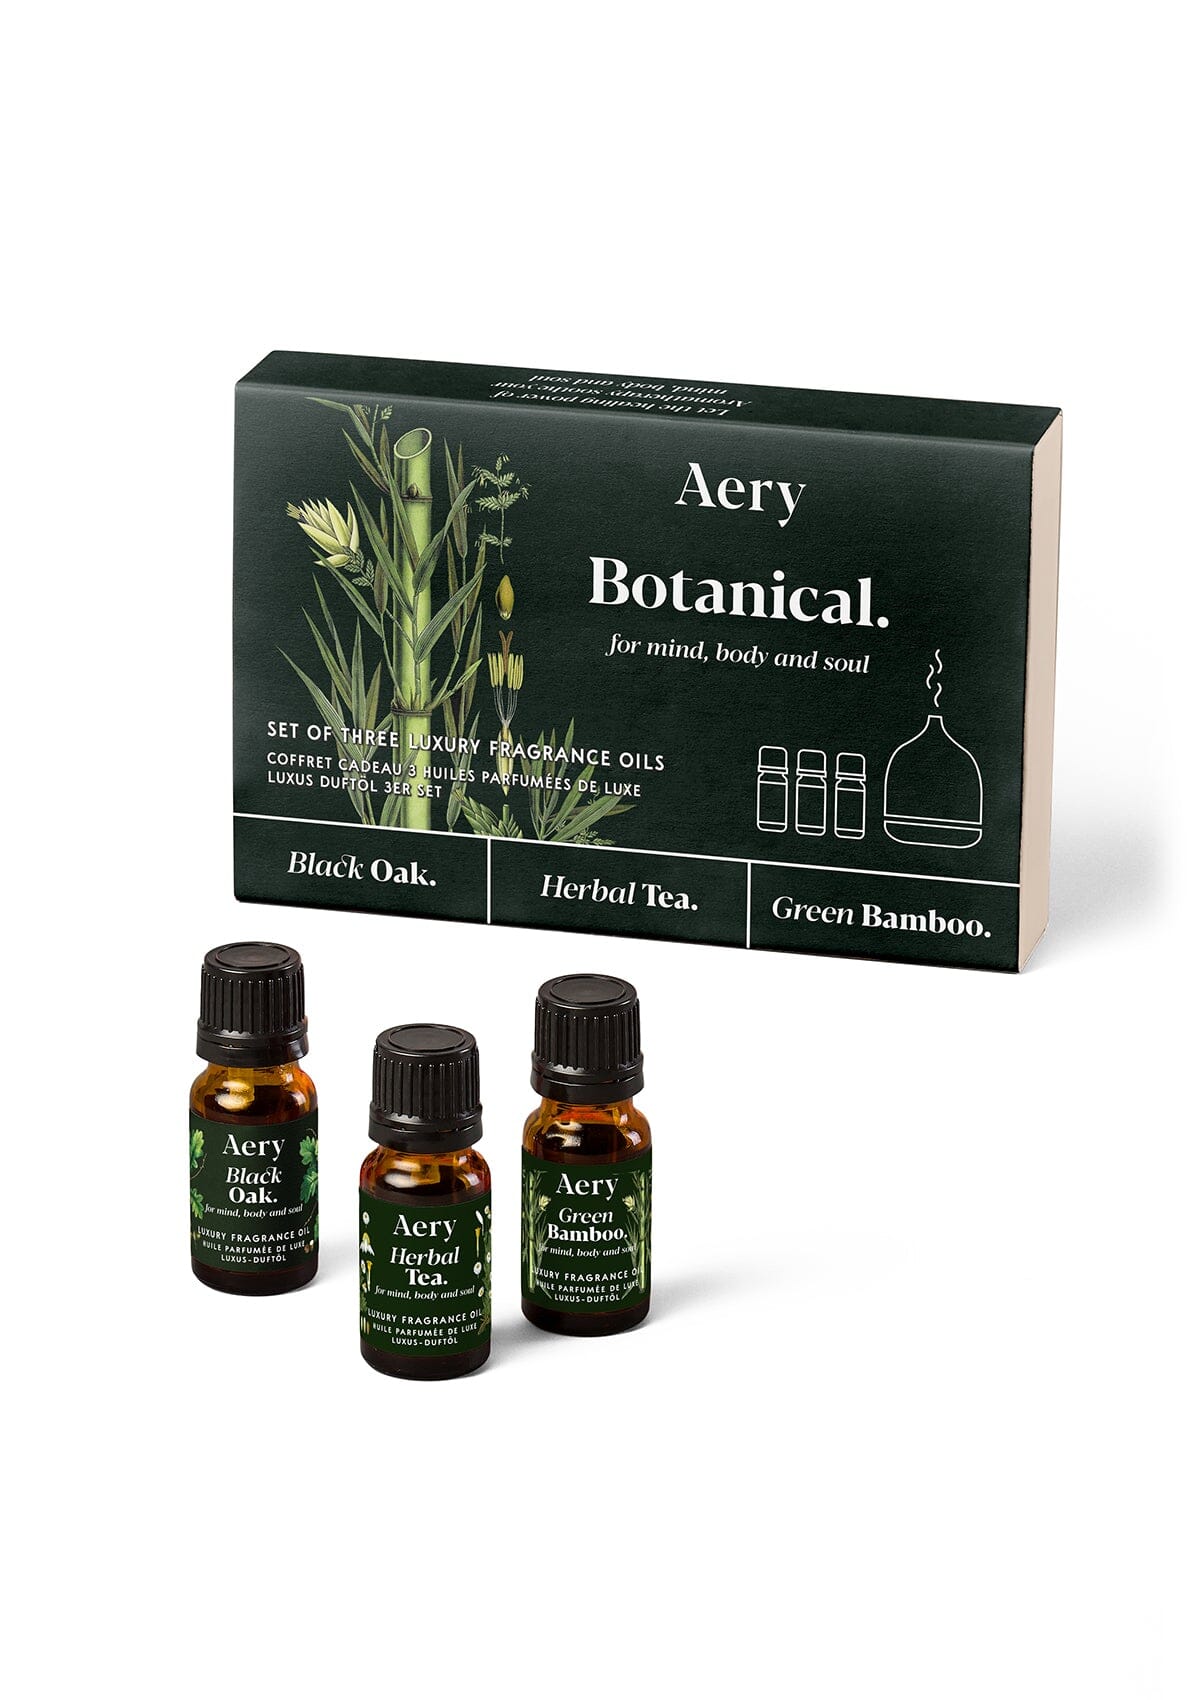 Green Botanical fragrance oil set of three displayed next to product packaging by Aery on white background 